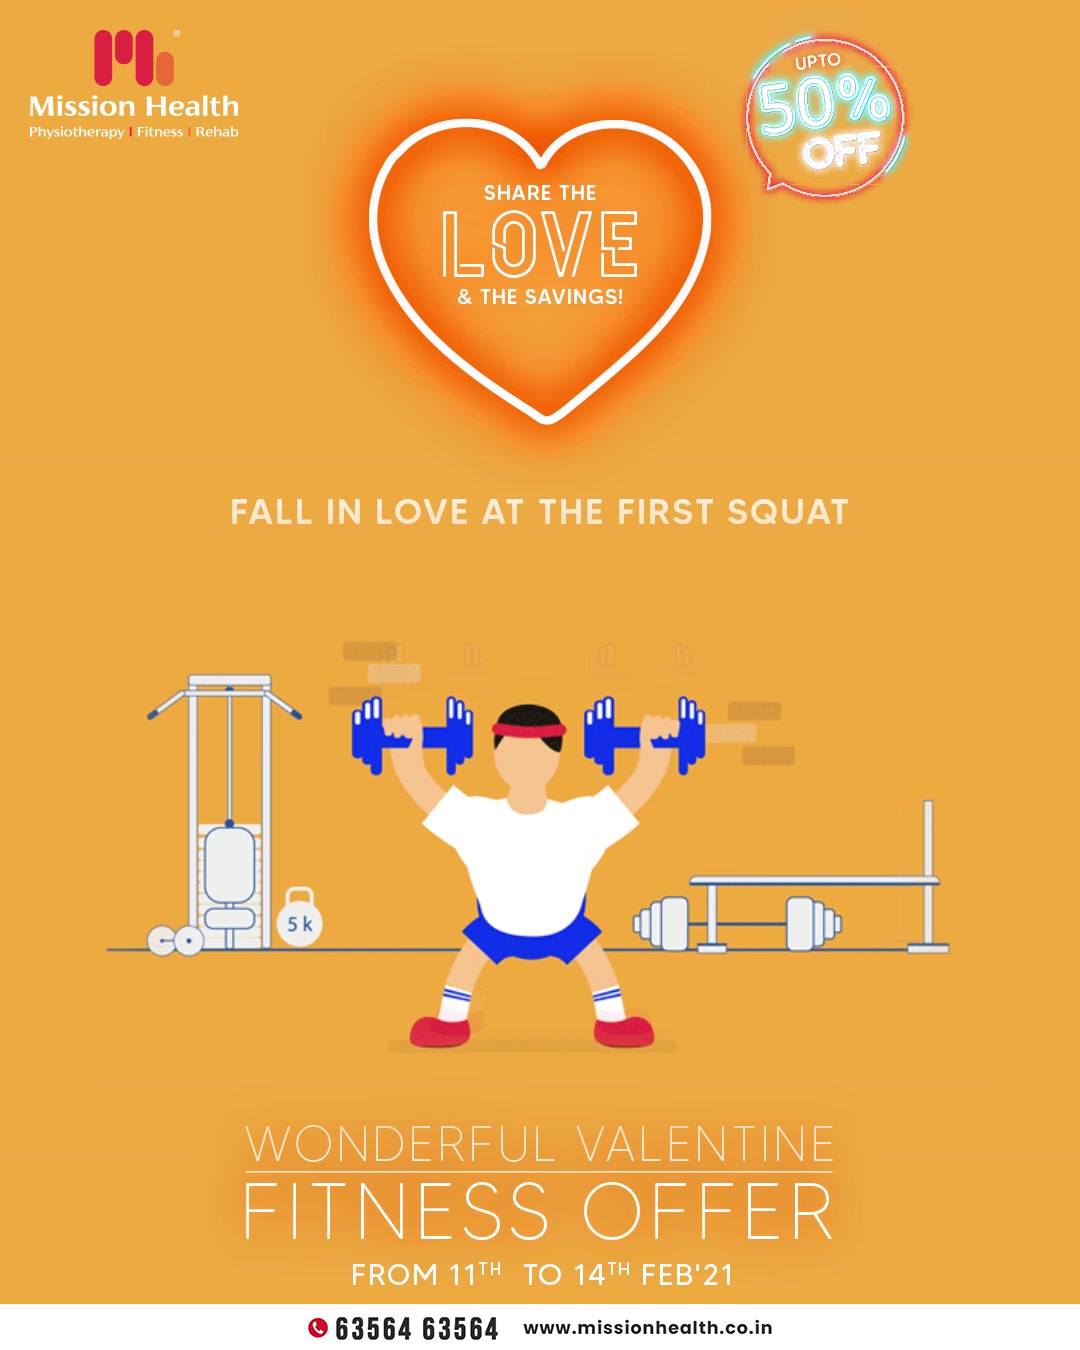 Gone are the days of “Love at first sight”; it’s time to “fall in love with the first squat” because the benefits of doing squats are a gracious plenty.

Awaken the fitness enthusiast in you and walk miles ahead on the path of fitness towards your health goals with our Wonderful Valentine Fitness Offer.

Mission Health Helpline Number: +916356463564
www.missionhealth.co.in

#ValentineFitnessOffer #FitnessisFirstLove #MissionHealth #Fitness #PersonalTraining #FatToFit #Transform #GroupFitness #Slimming #MovementIsLife